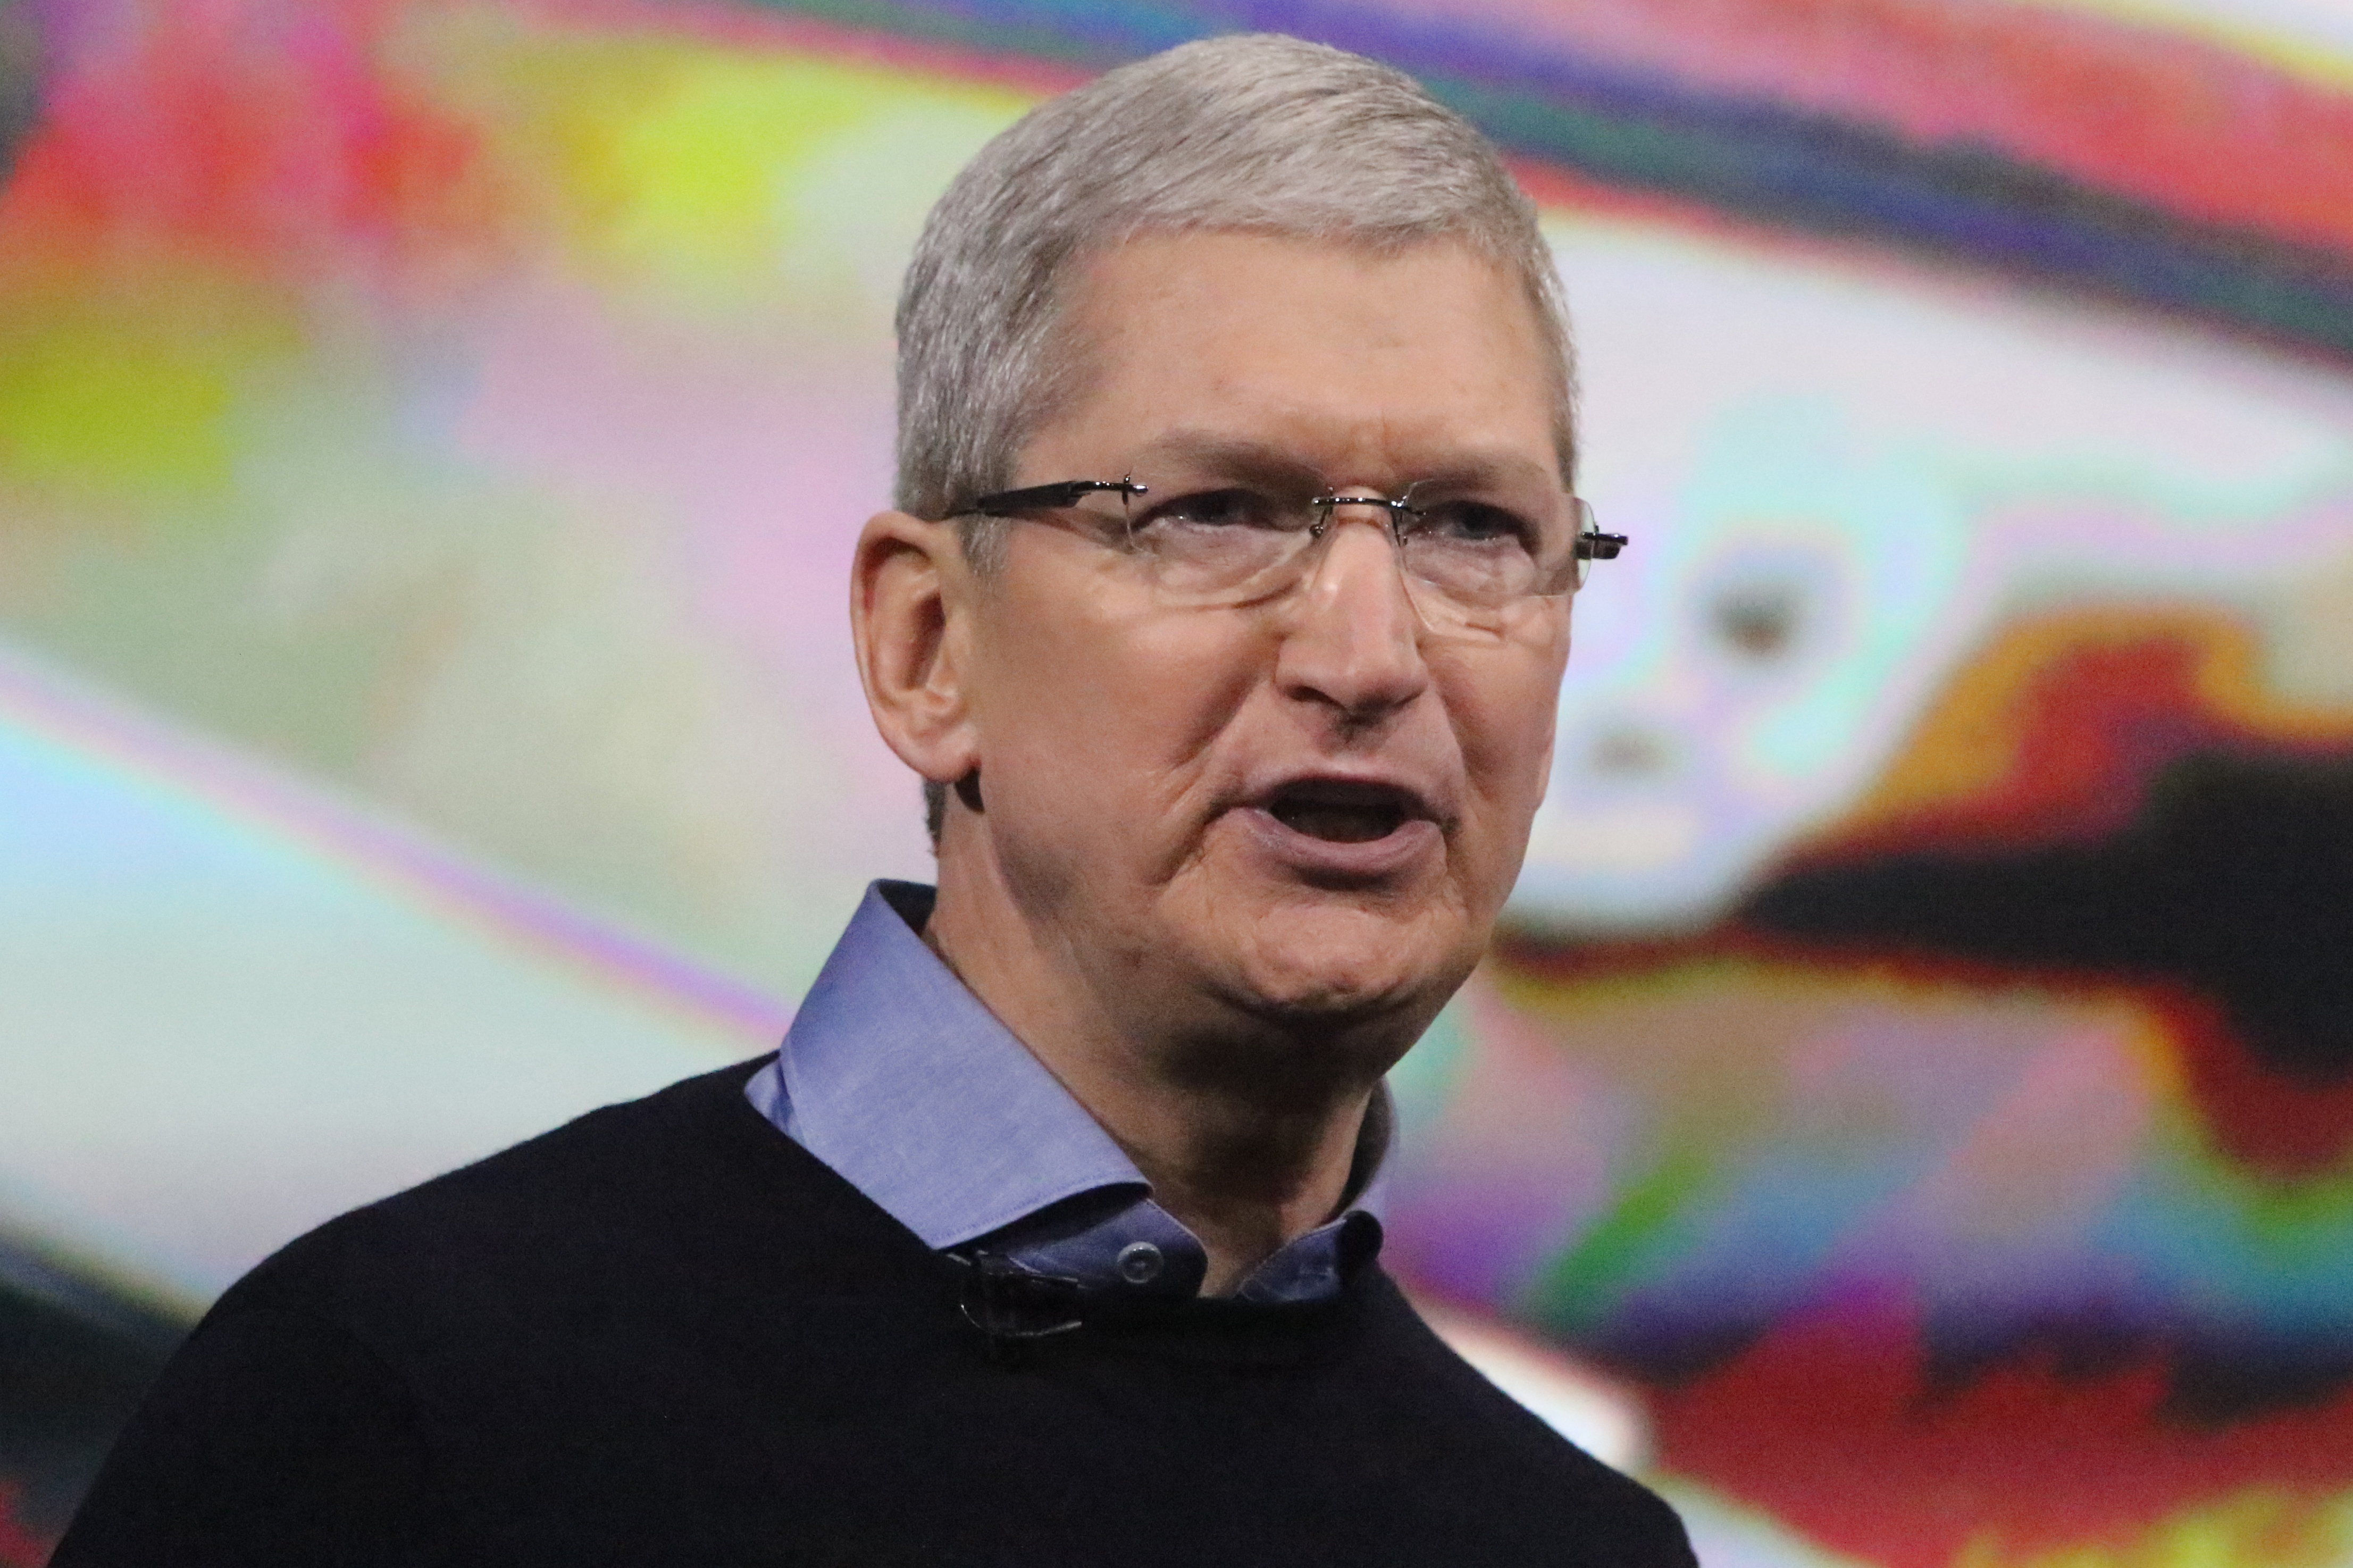 Tim Cook in Cupertino, Calif. on March 21, 2016. (Christoph Dernbach—Getty Images)